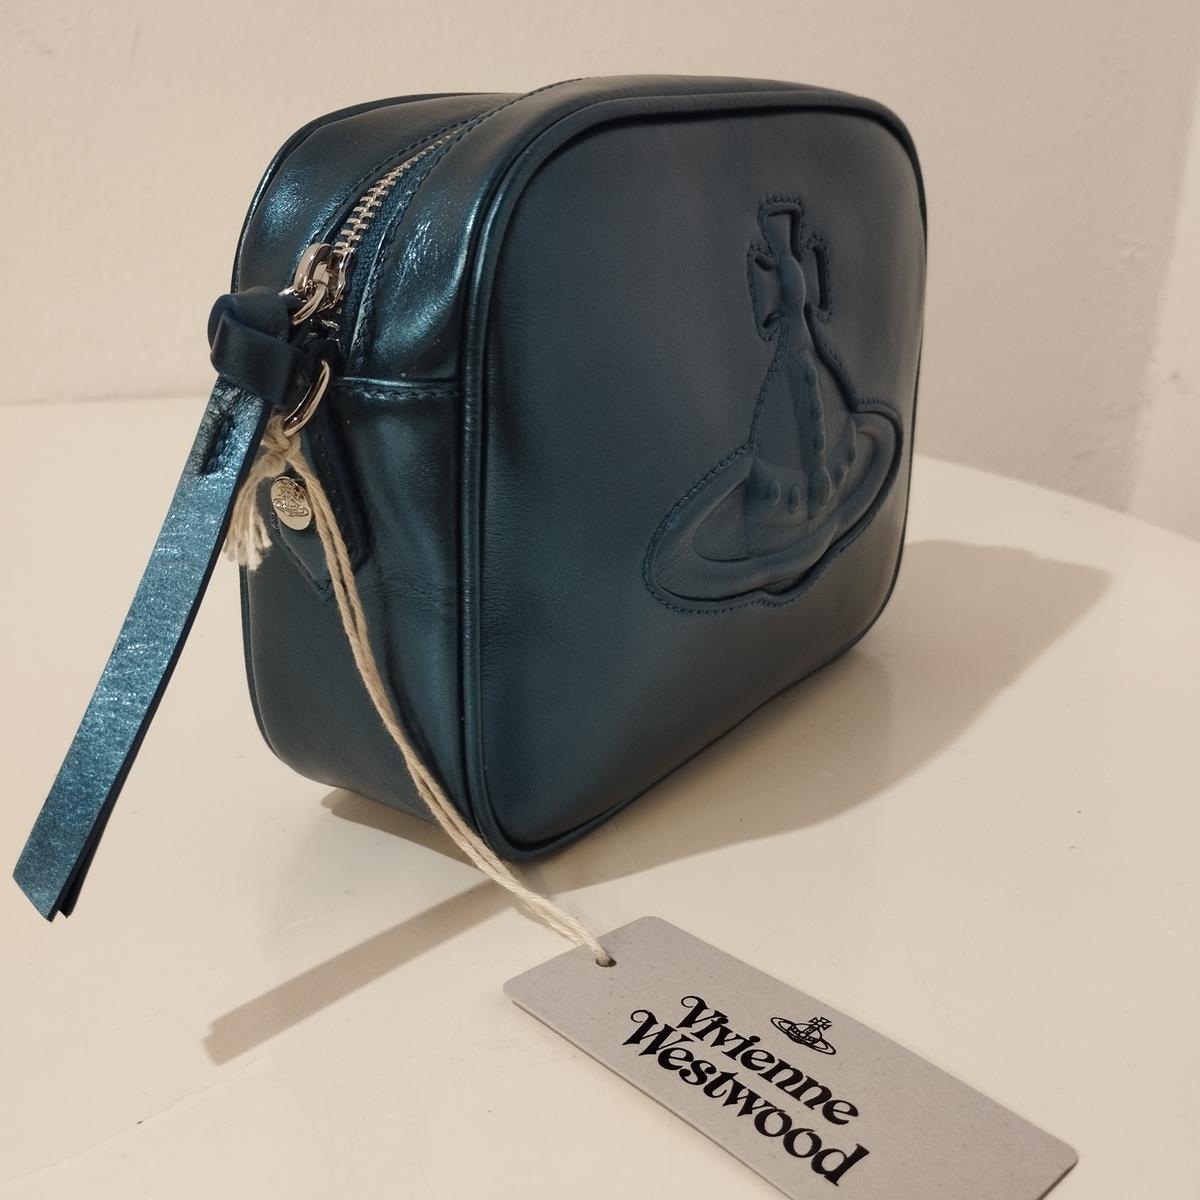 Vivienne Westwood Metal Camera Bag In Excellent Condition For Sale In Gazzaniga (BG), IT